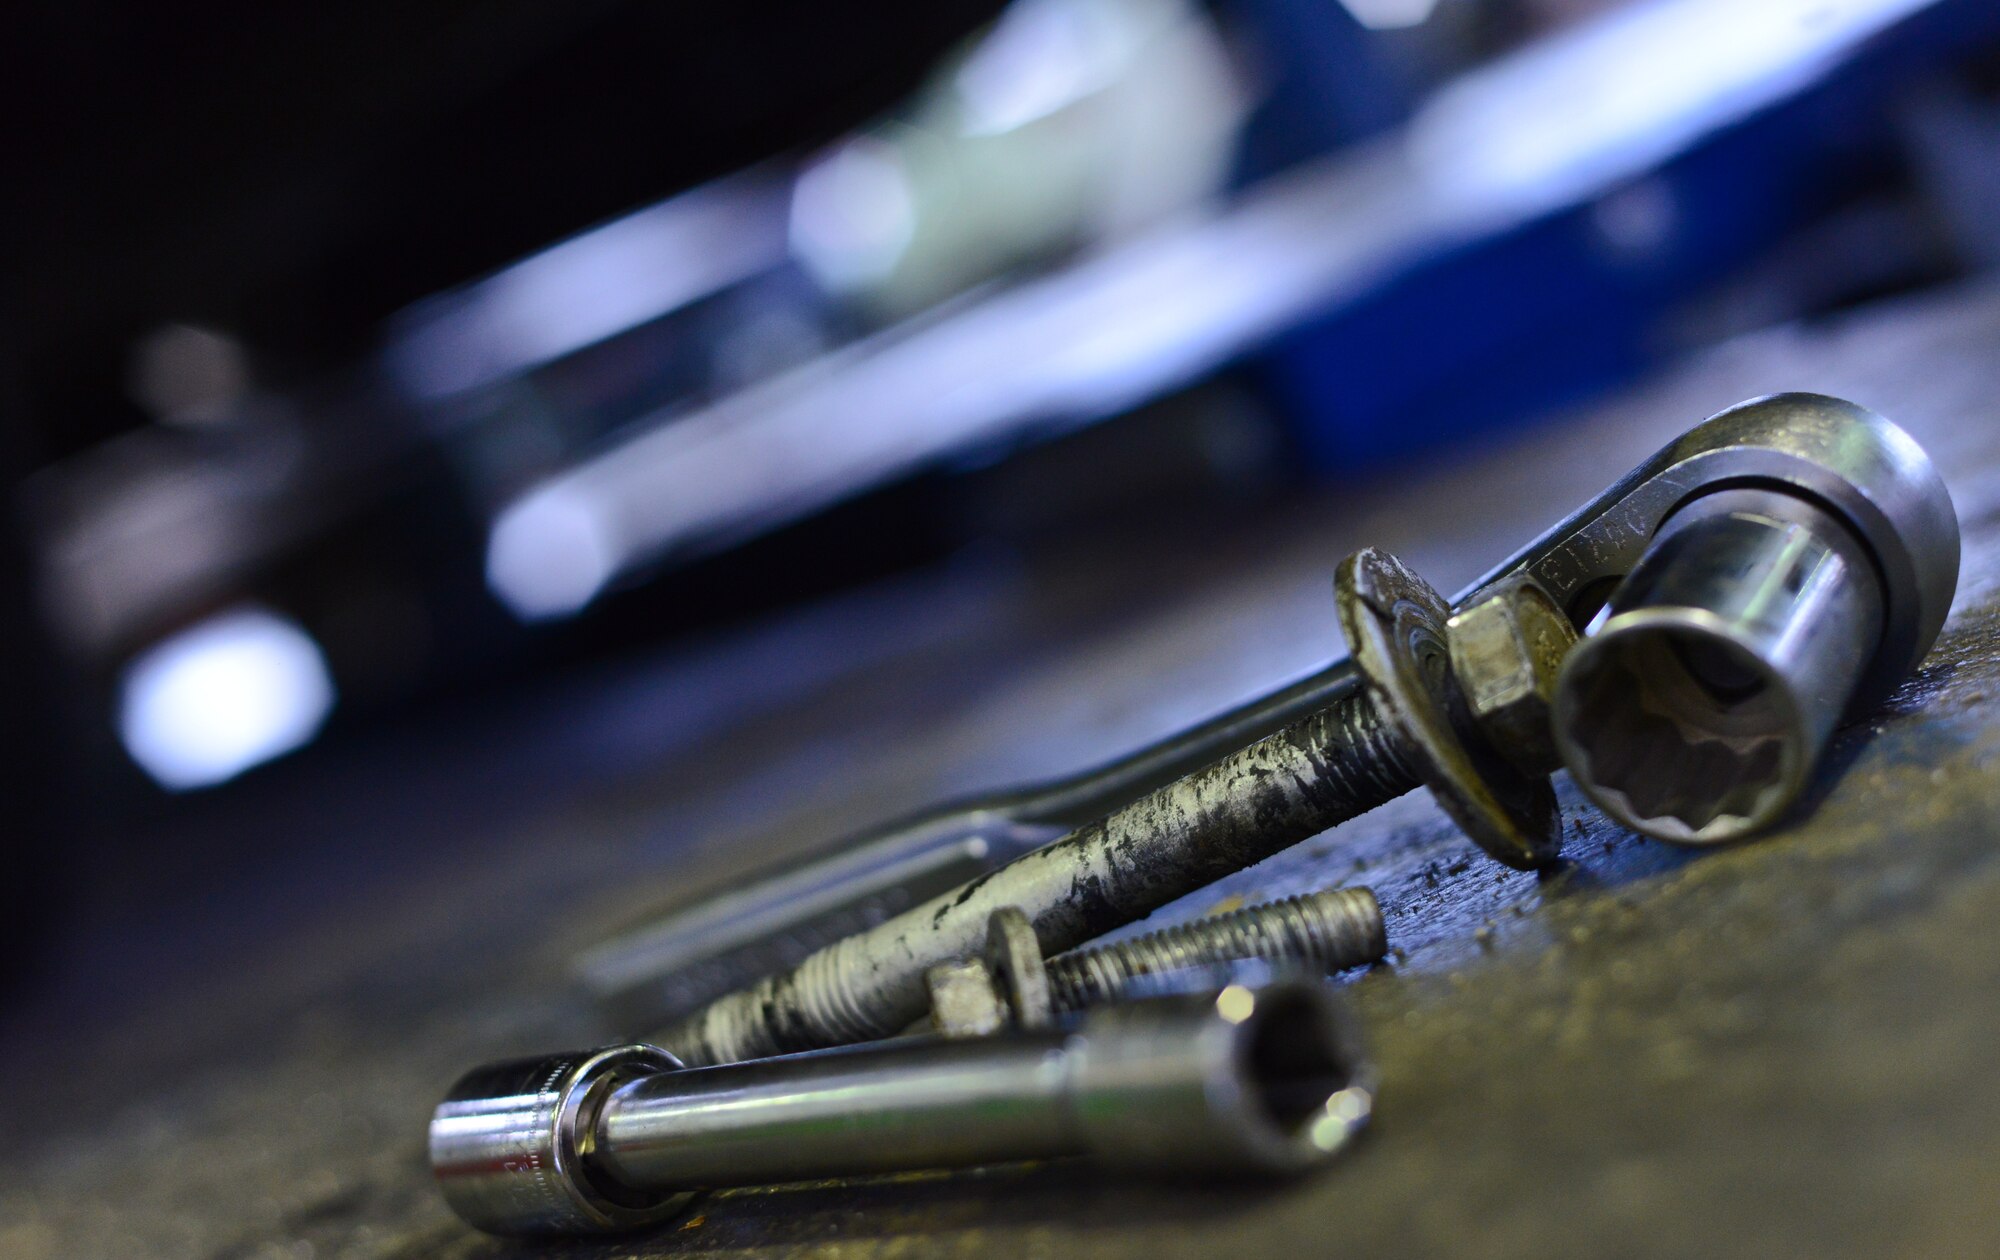 Tools rest on a vehicle lift at Ramstein Air Base, Germany, Jan. 14, 2015. The 86th Vehicle Readiness Squadron general purpose light vehicle flight services vehicles from sedans to heavy-duty trucks. (U.S. Air Force photo by Senior Airman Nicole Sikorski/Released)